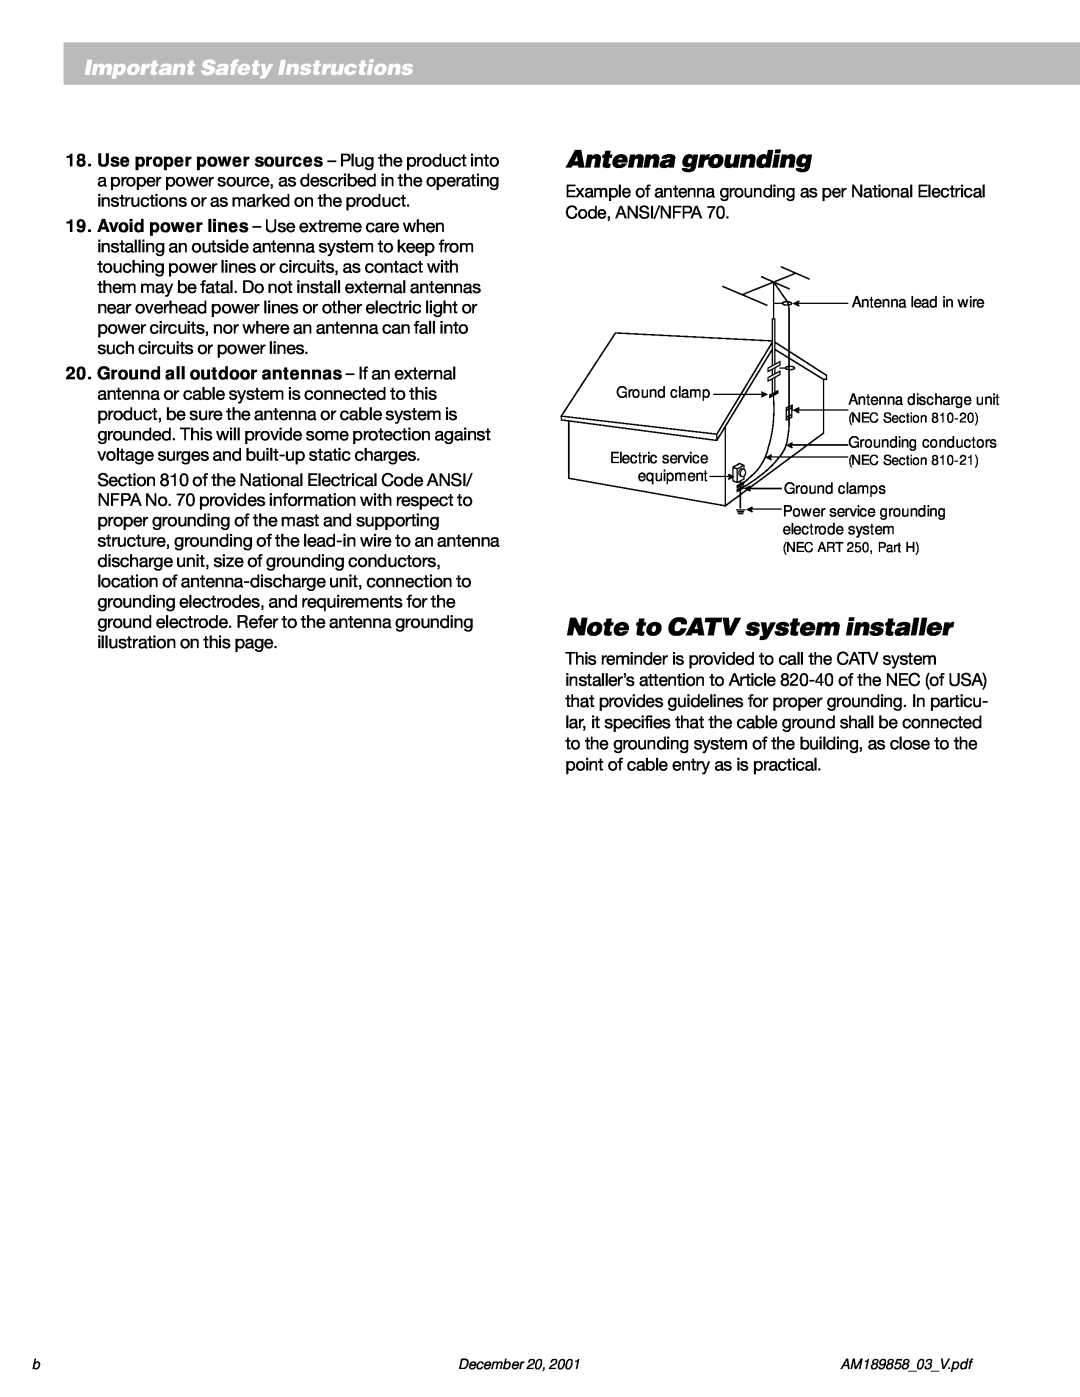 Bose 5 Antenna grounding, Note to CATV system installer, Important Safety Instructions, Antenna lead in wire, Ground clamp 